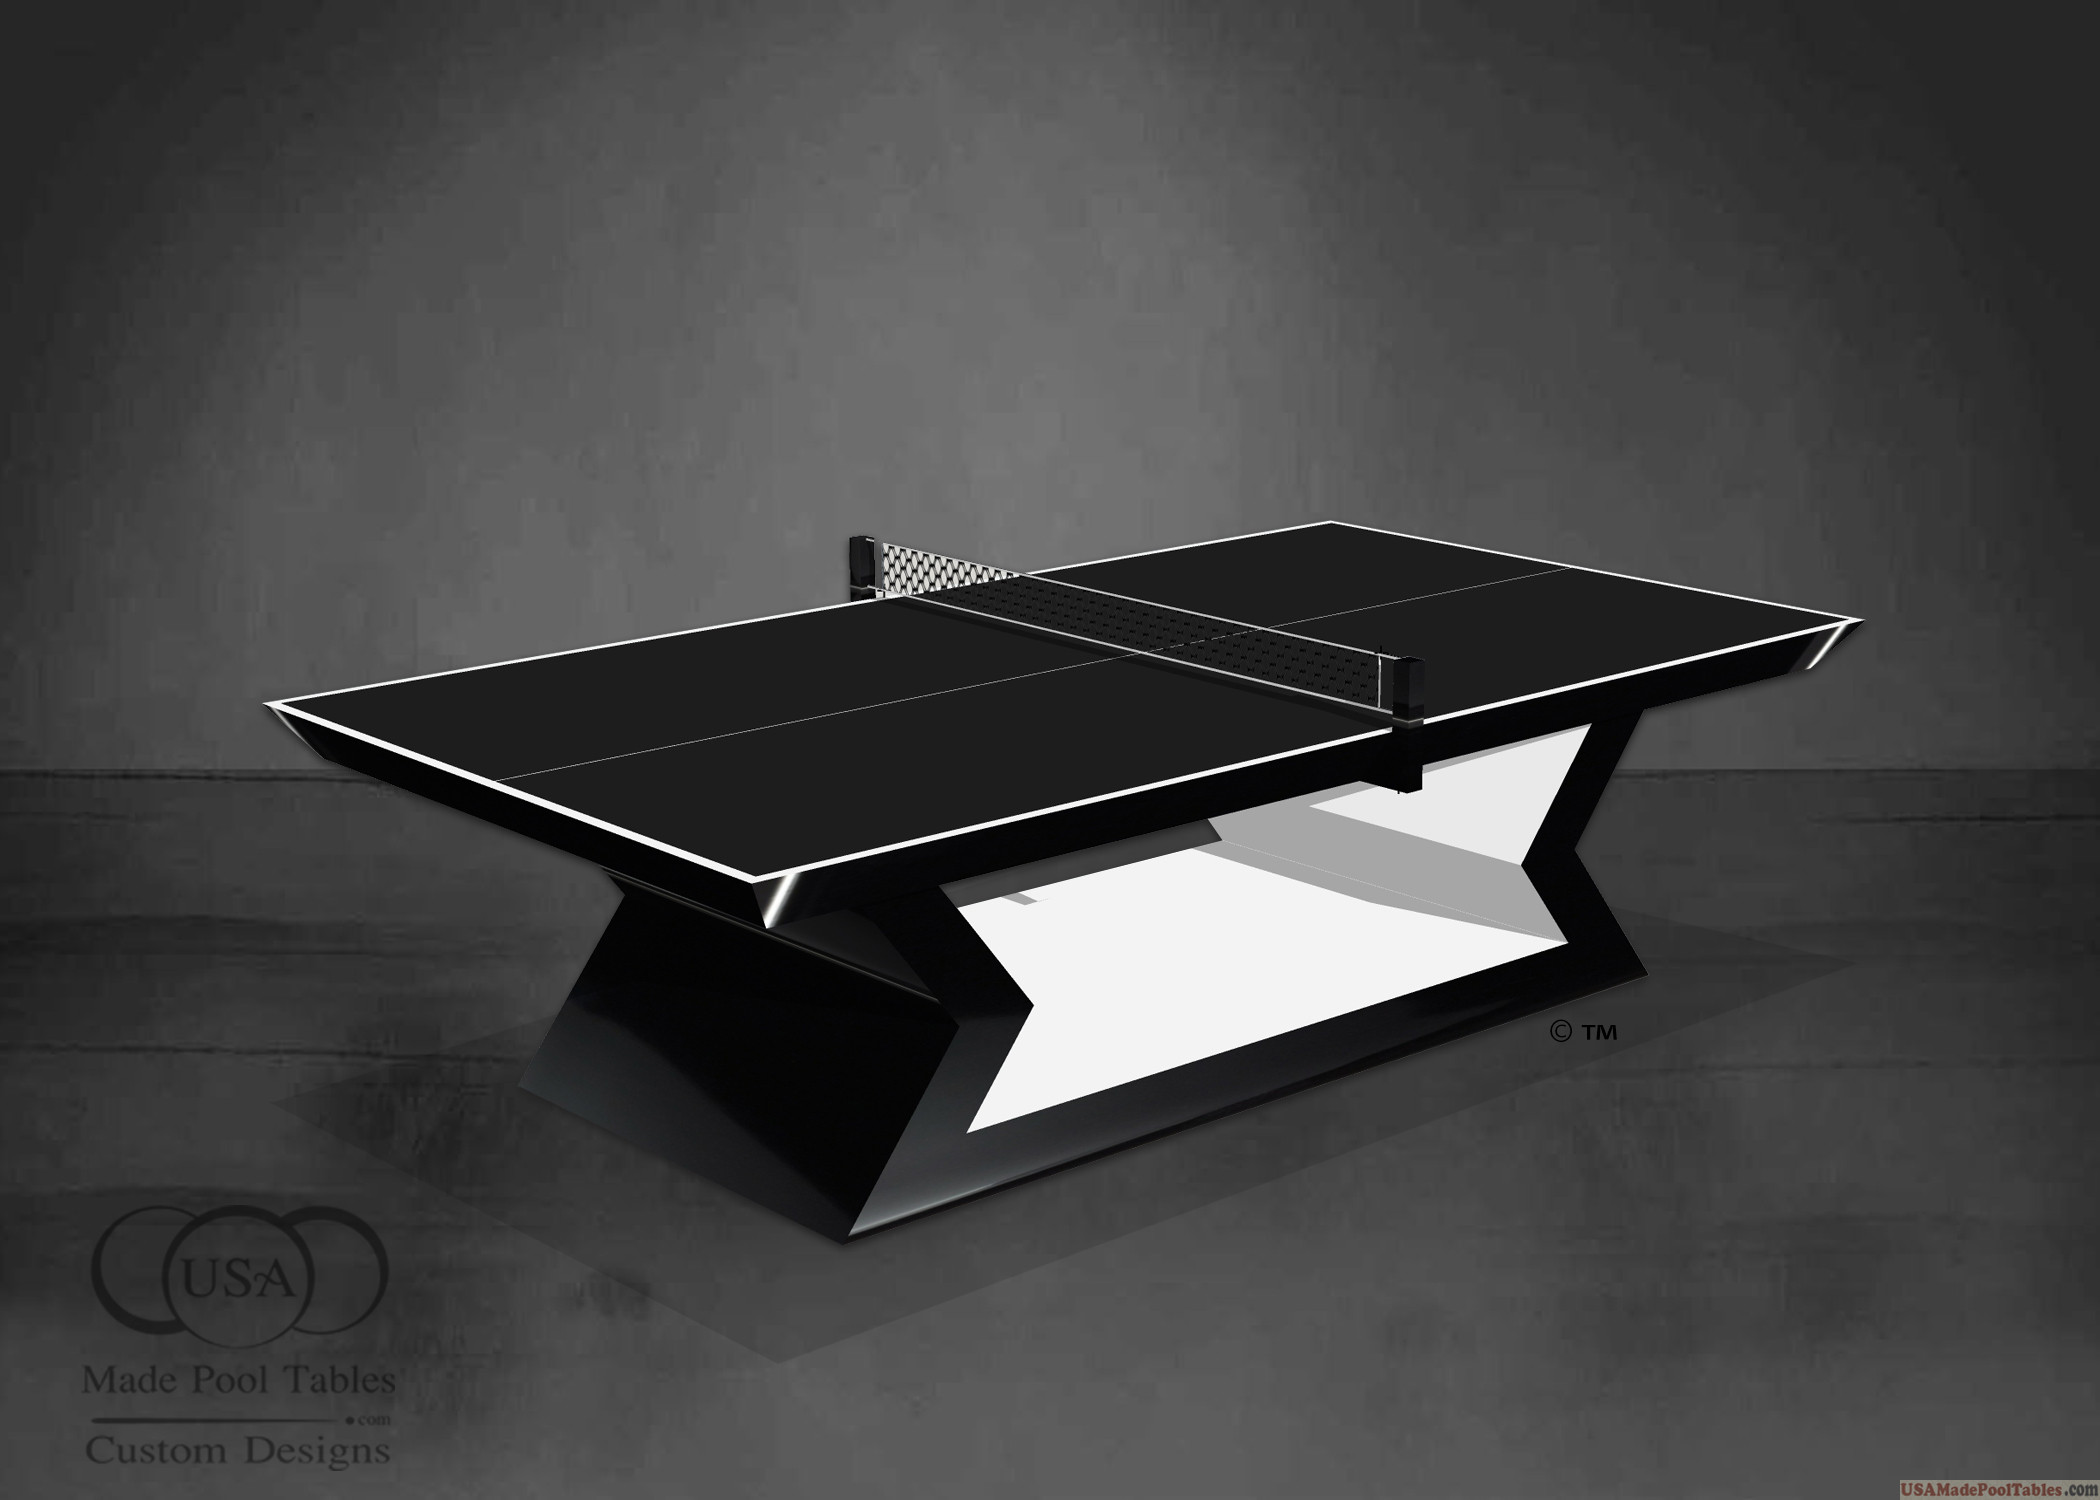 PING PONG TABLES : TENNIS TABLES